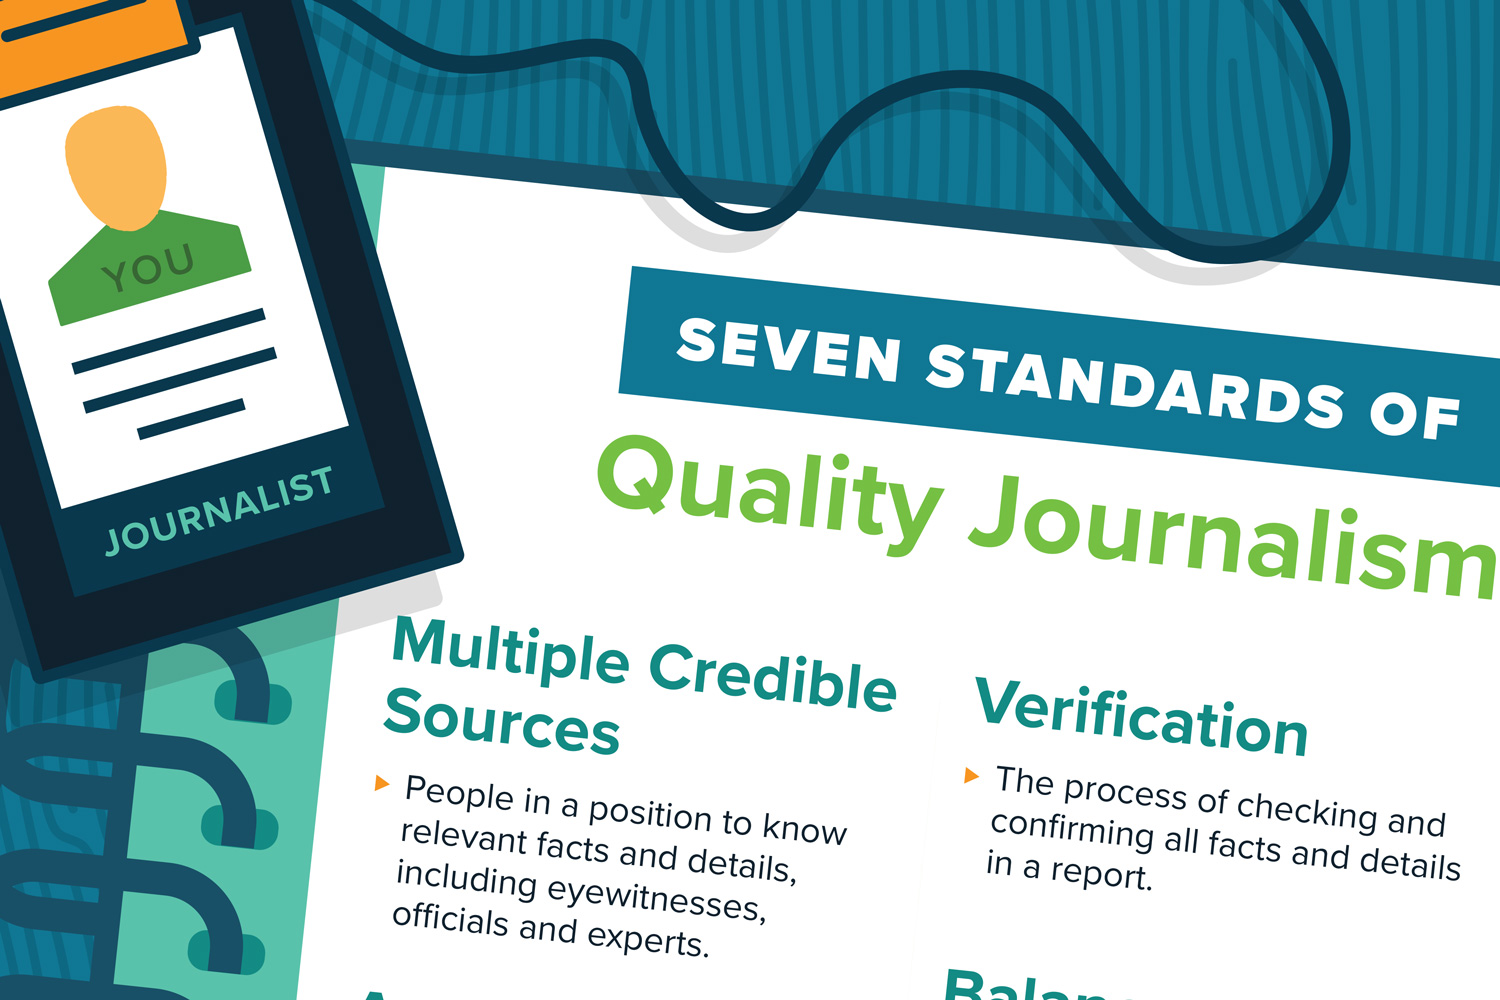 Seven Standards of Quality Journalism